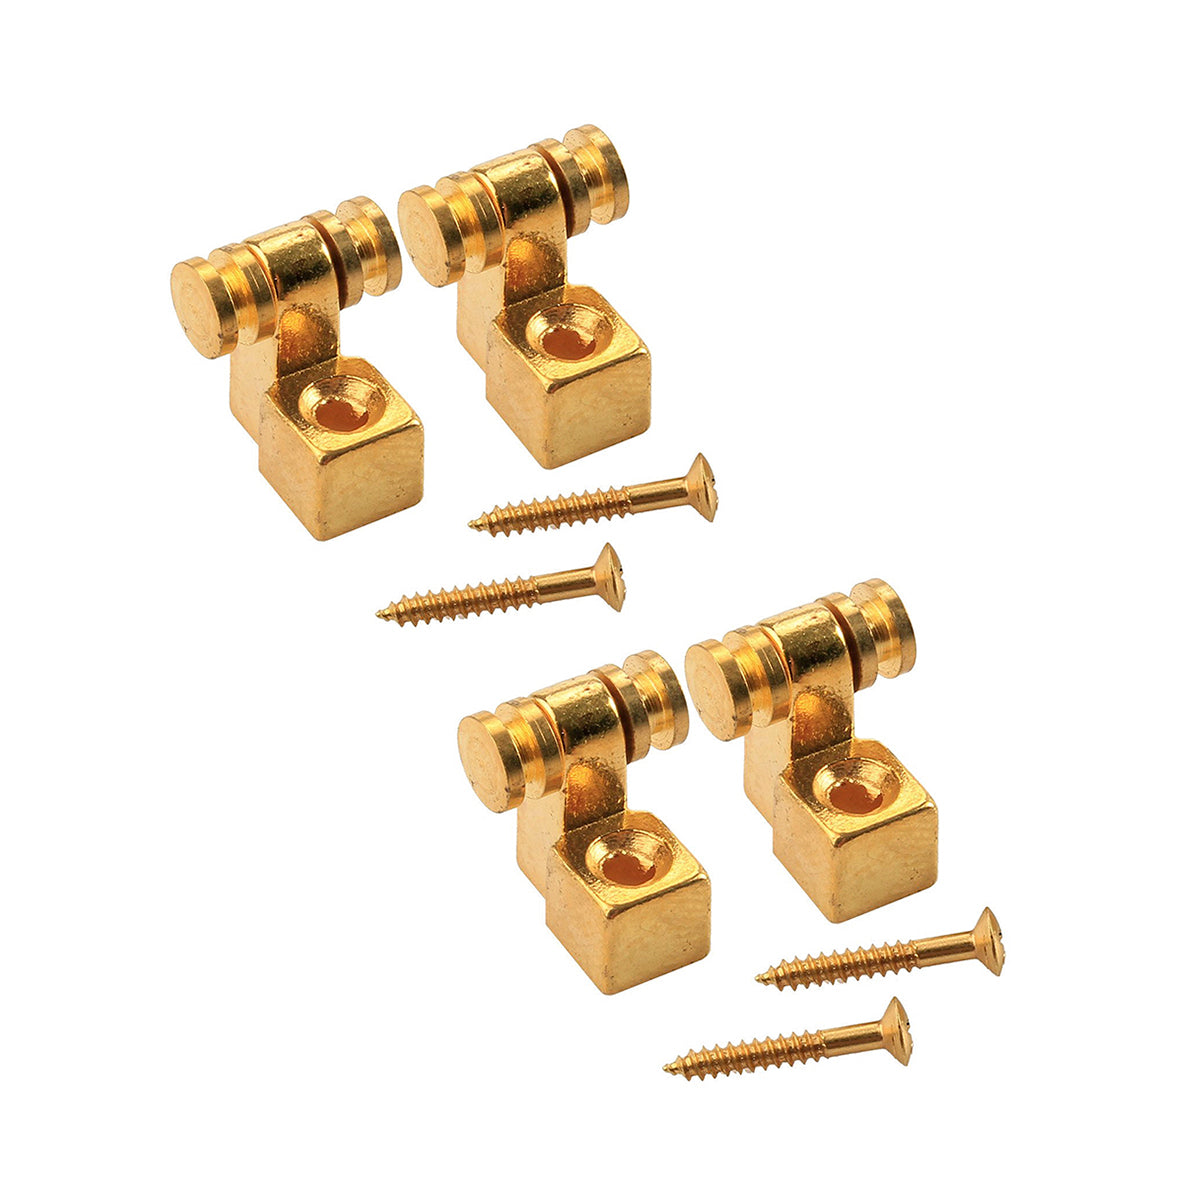 Musiclily Vintage Roller Guitar String Guides for Fender Strat Stratocaster Tele Telecaster Electric Guitar, Gold(4 Pieces)